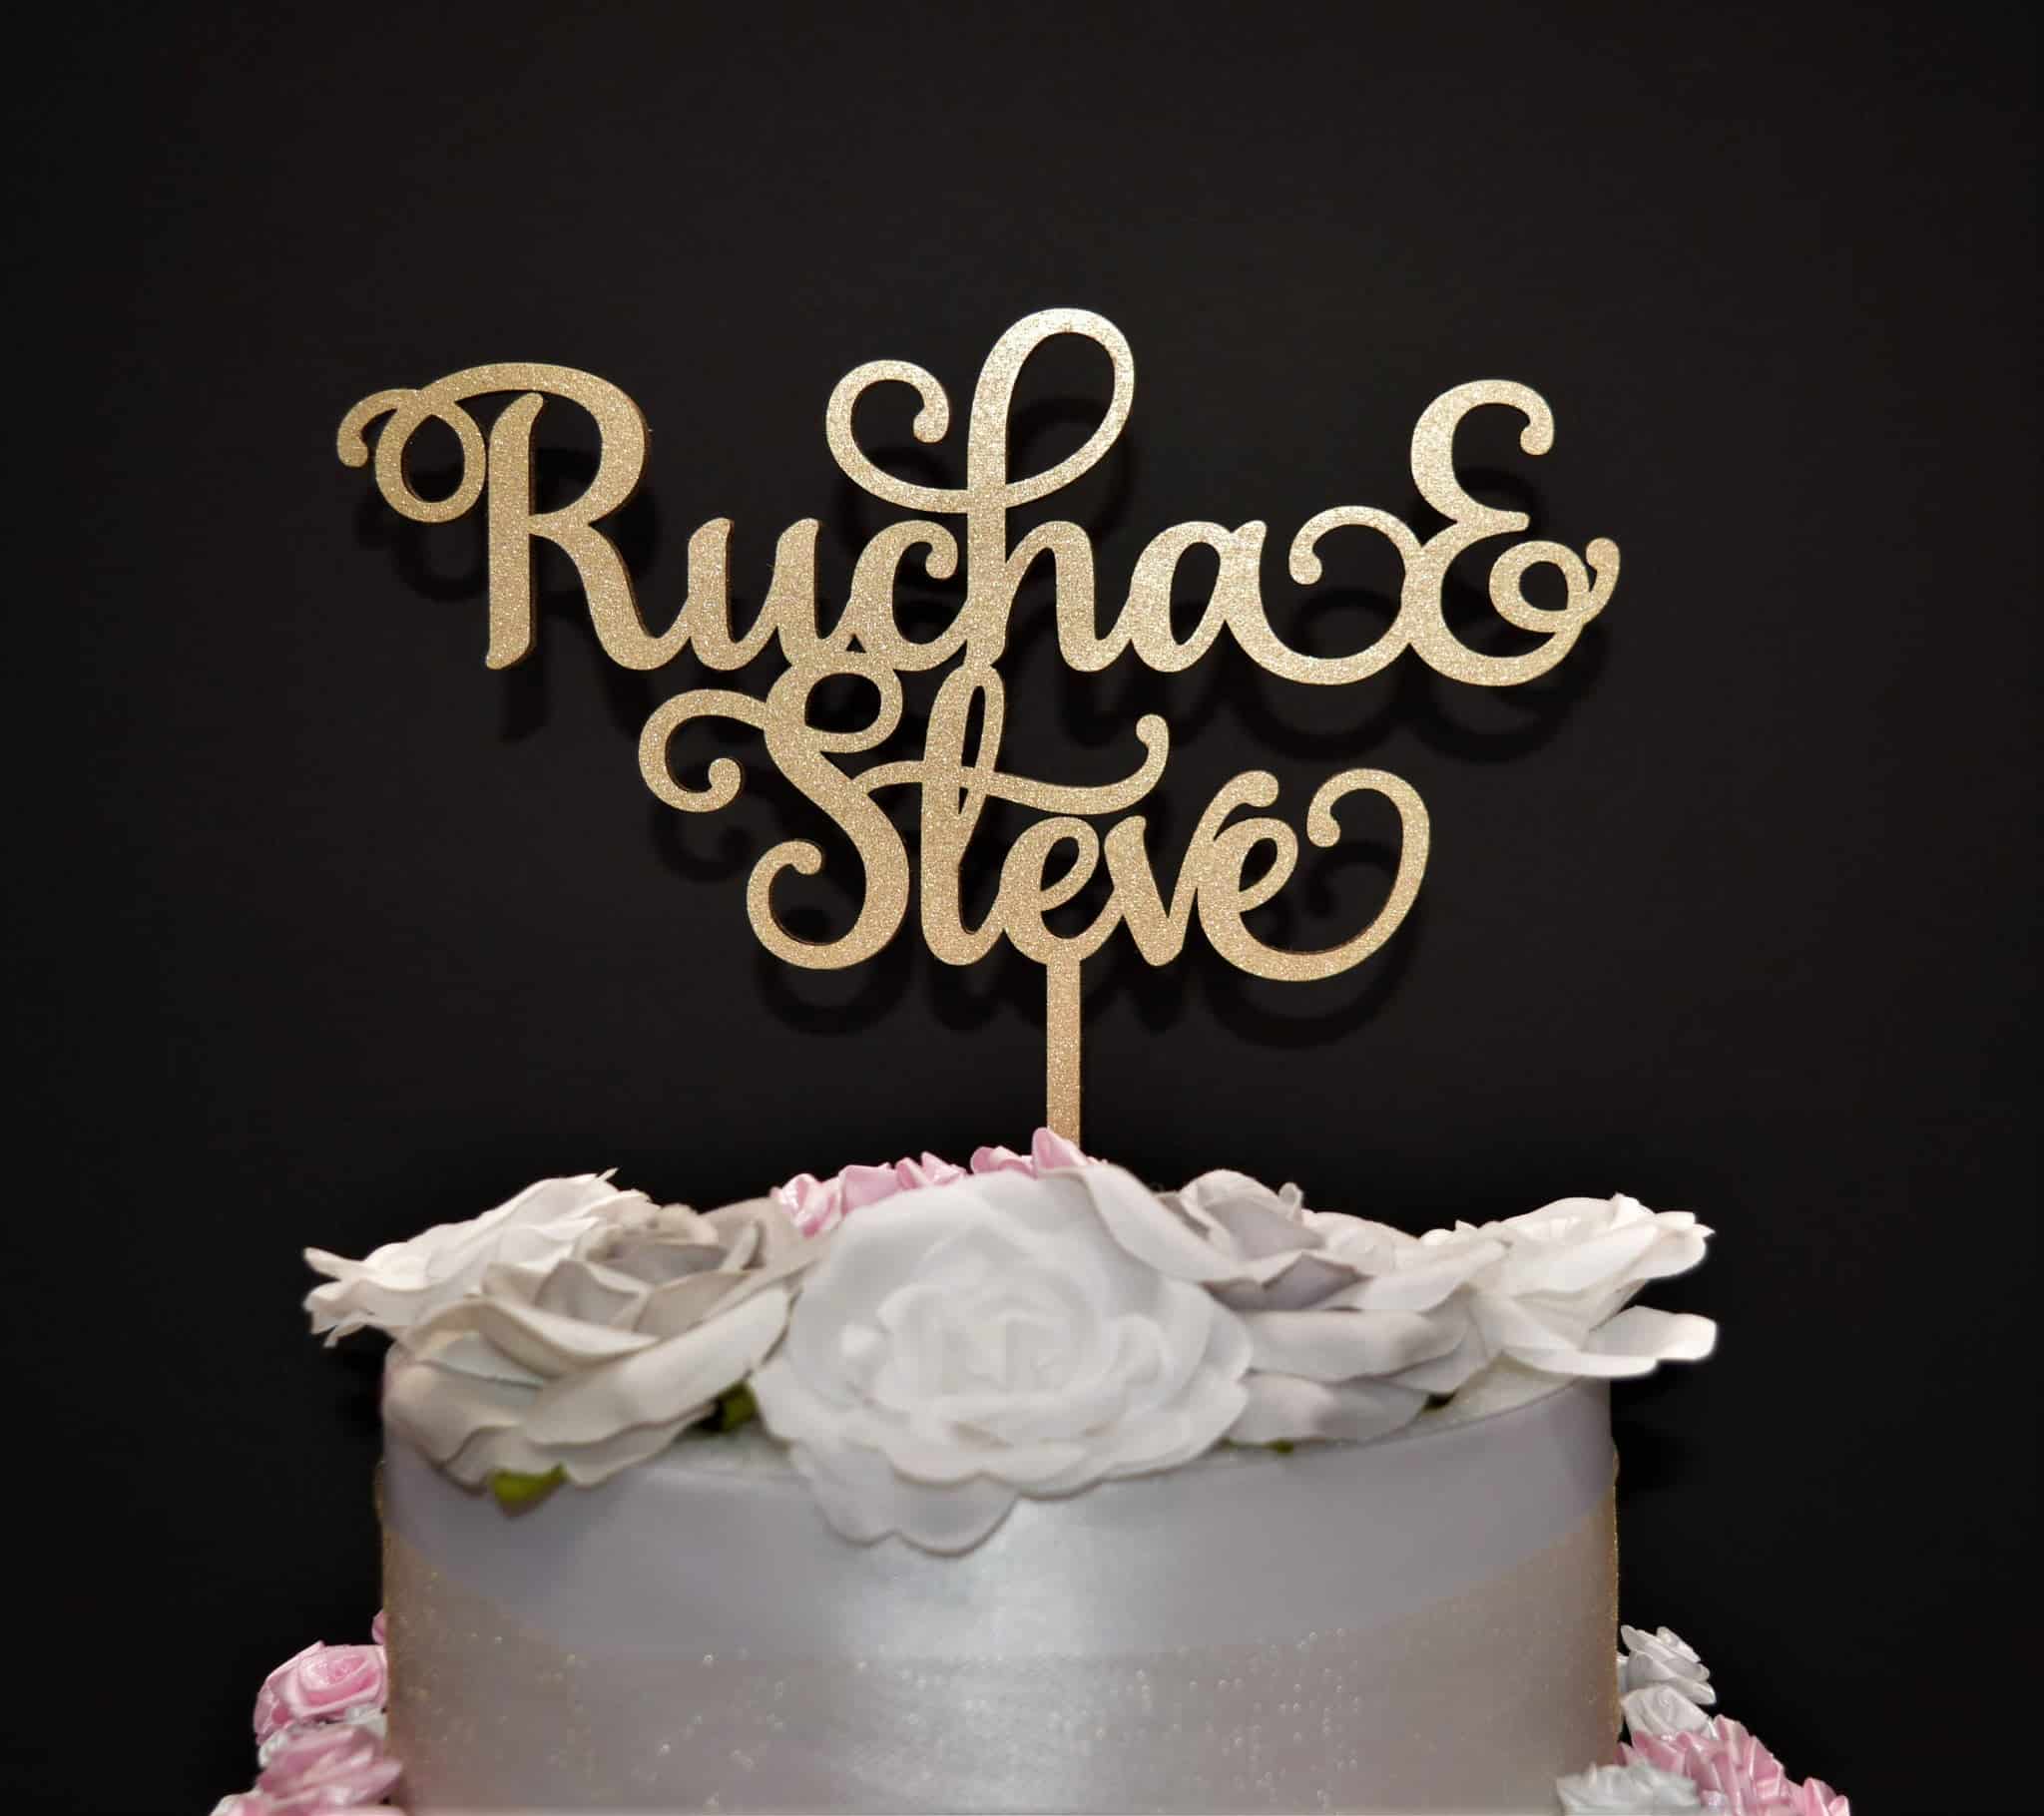 Personalized Wedding Cake topper with Couple